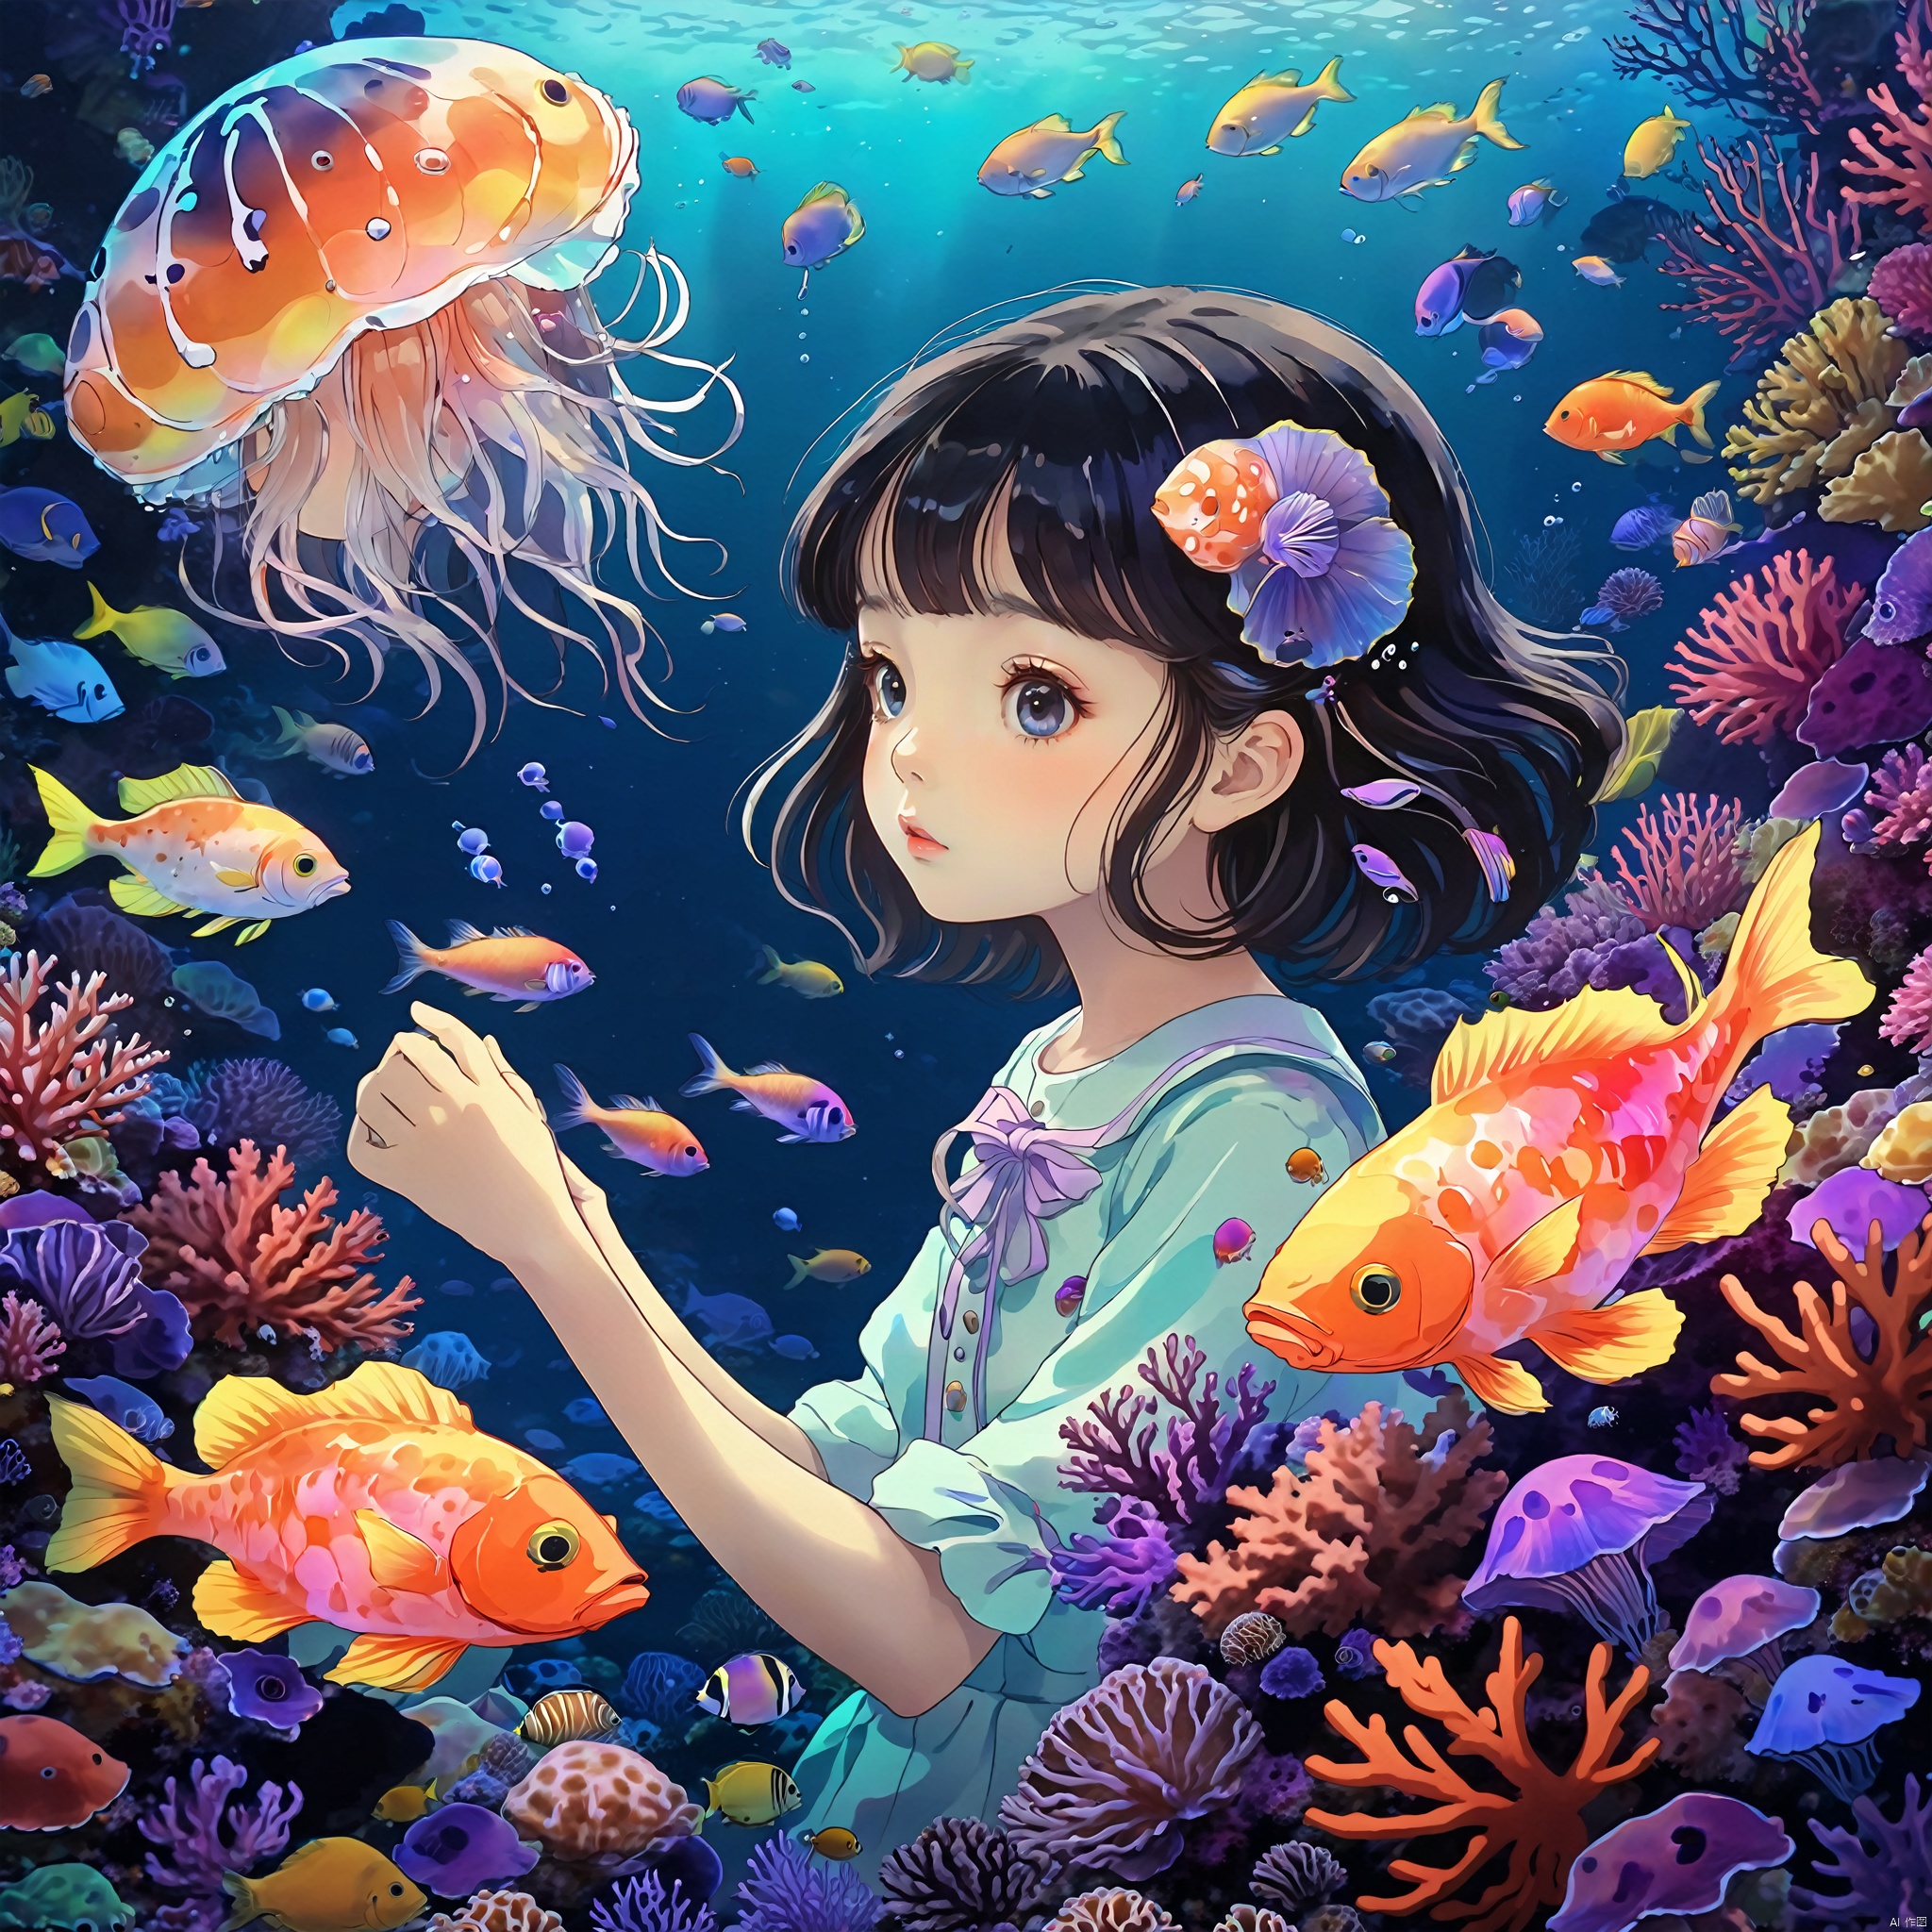  A young girl, exquisite and beautiful, with deep-sea fish and various colors of coral and jellyfish, sea anemones, corals, psychedelic, various marine creatures, bright color combinations, fantasy7033, sangonomiyakokom, waterM